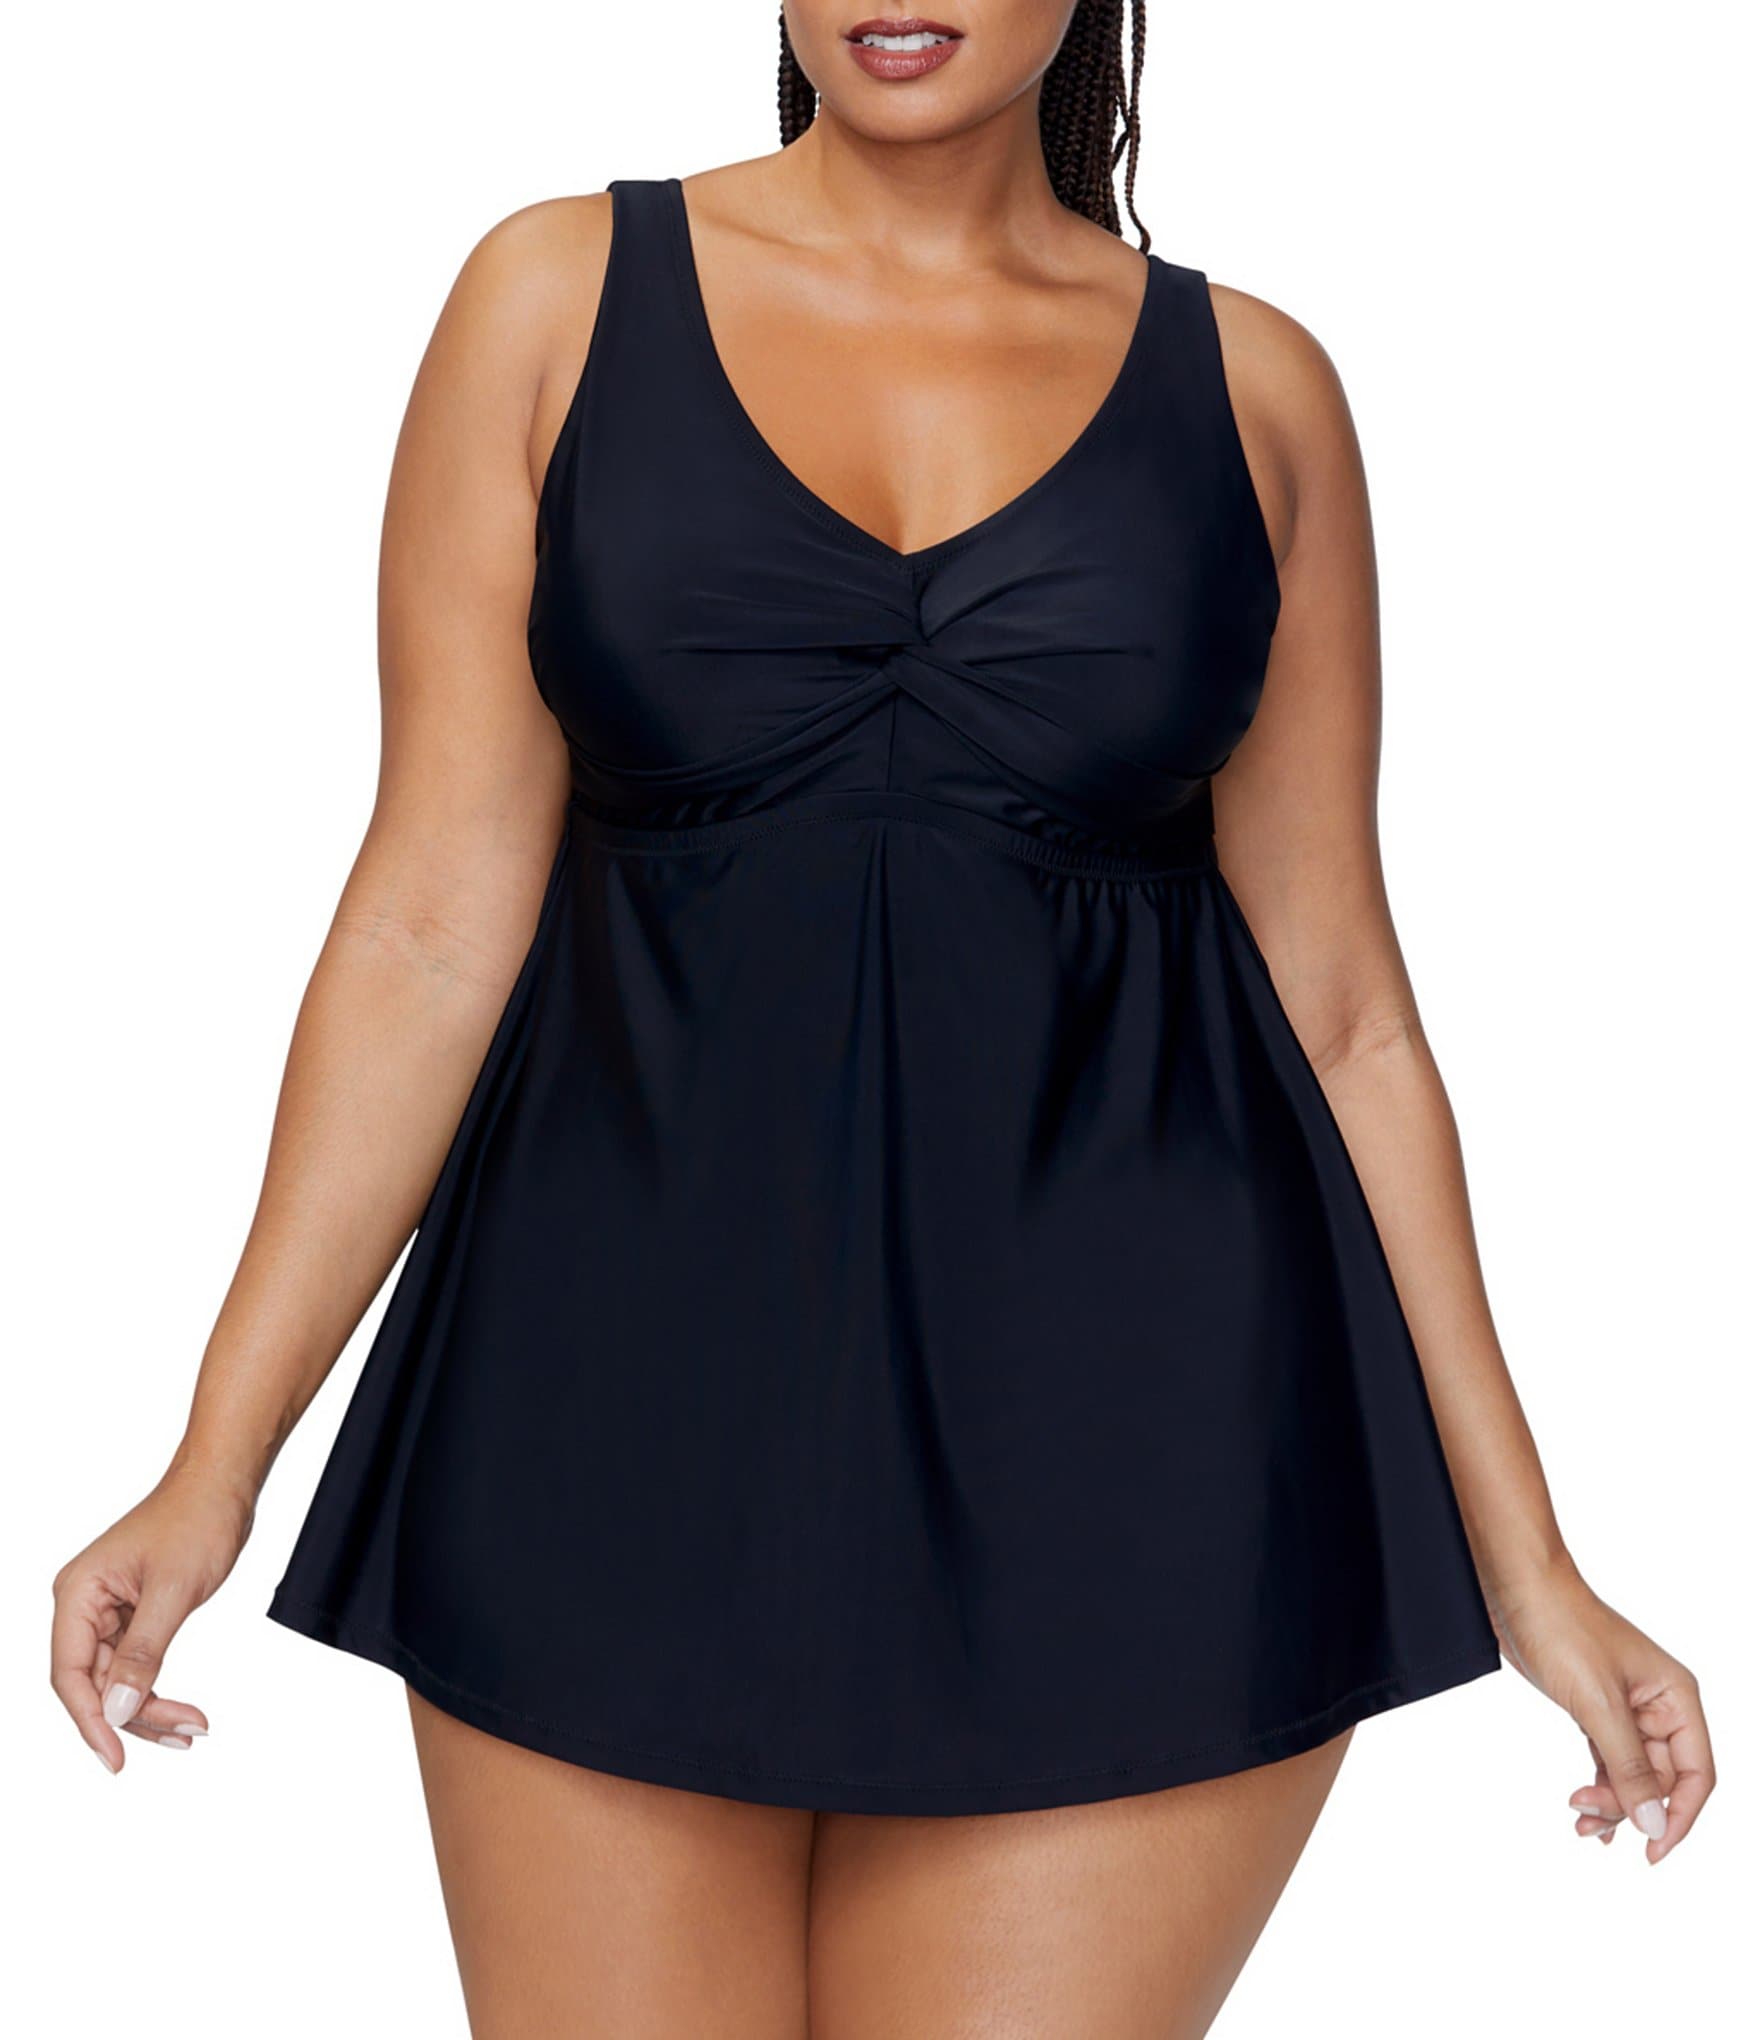 Target's Swim Dresses Deliver Perfect 'Tummy Control' & Amplify Curves